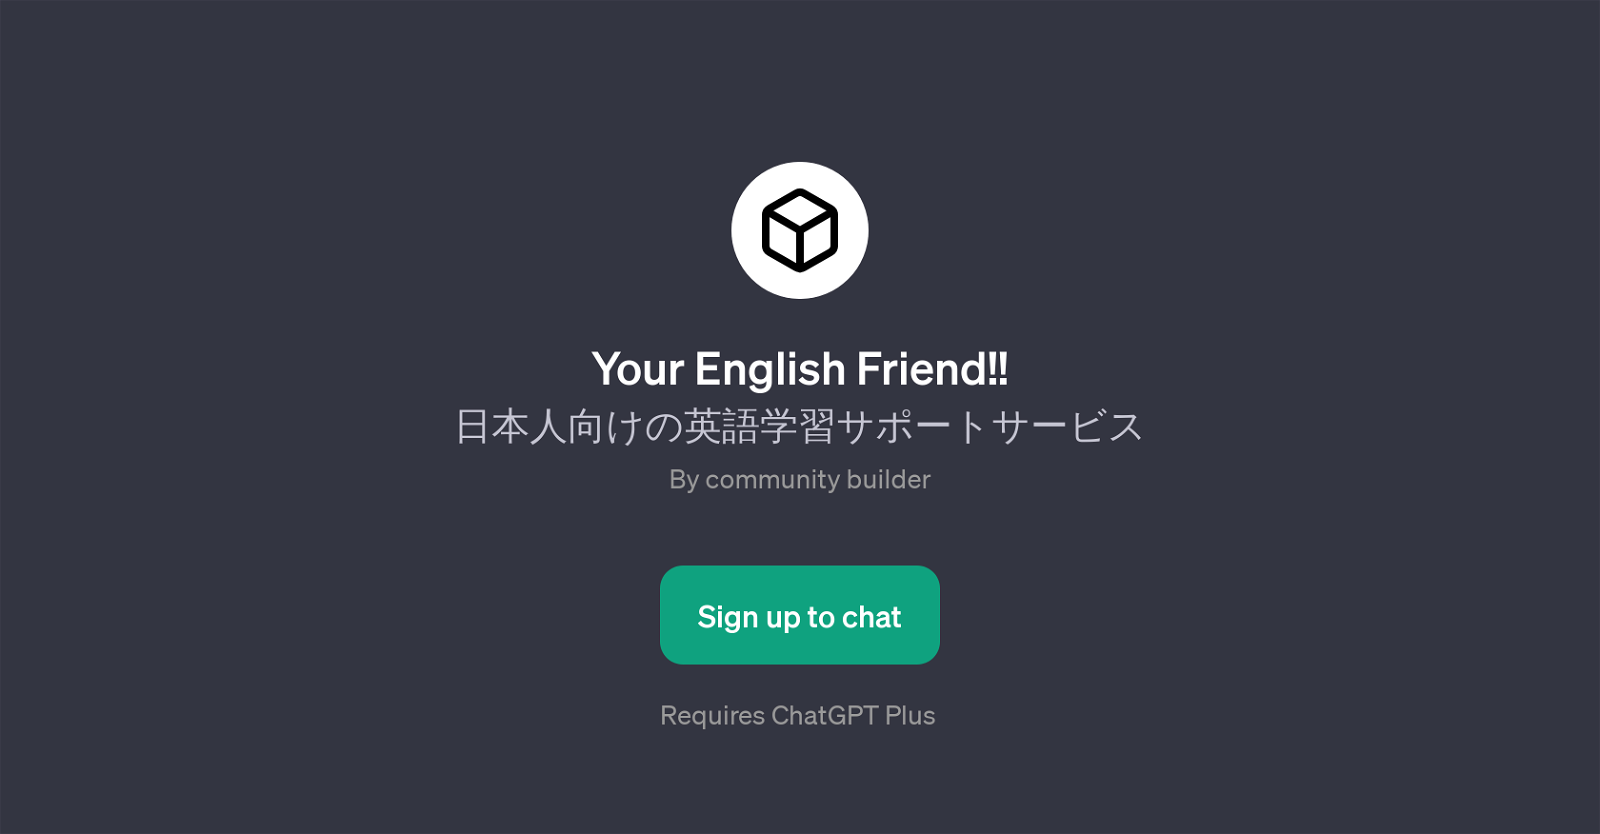 Your English Friend website